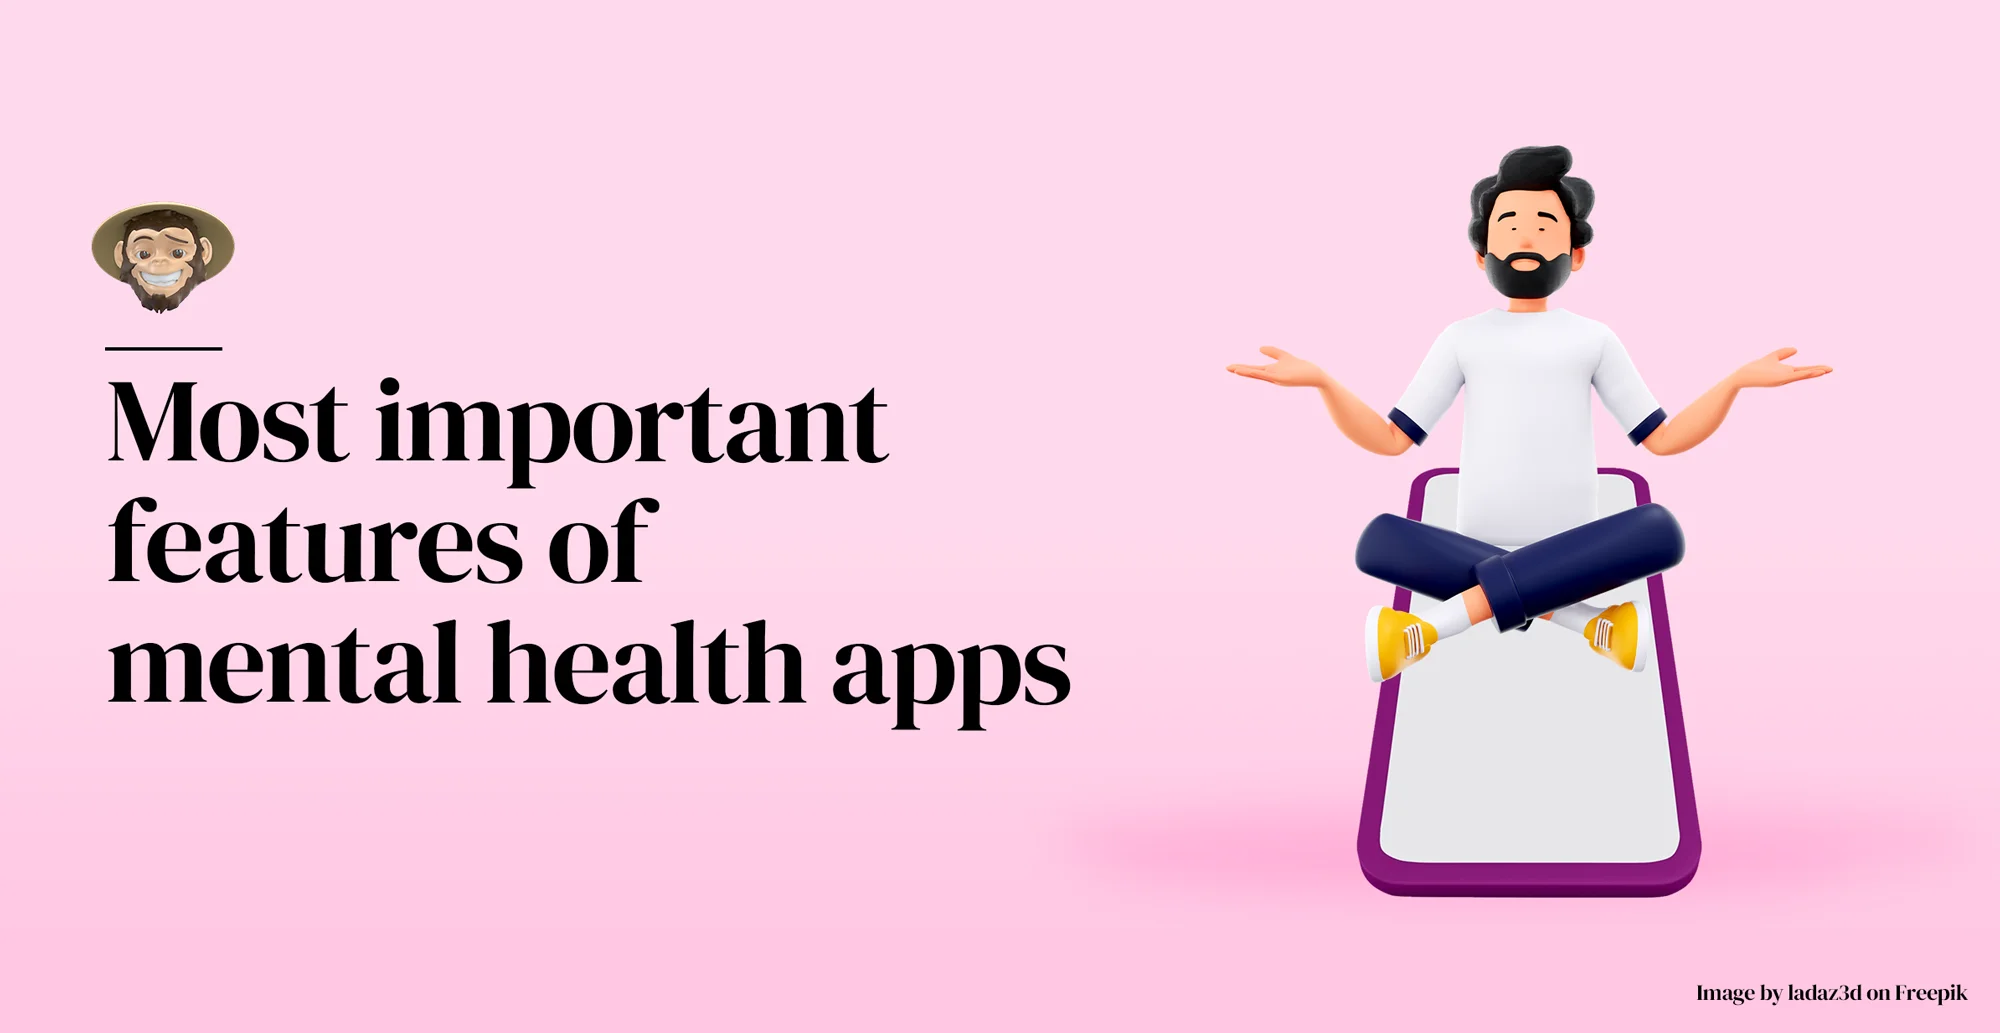 Most important features of mental health apps